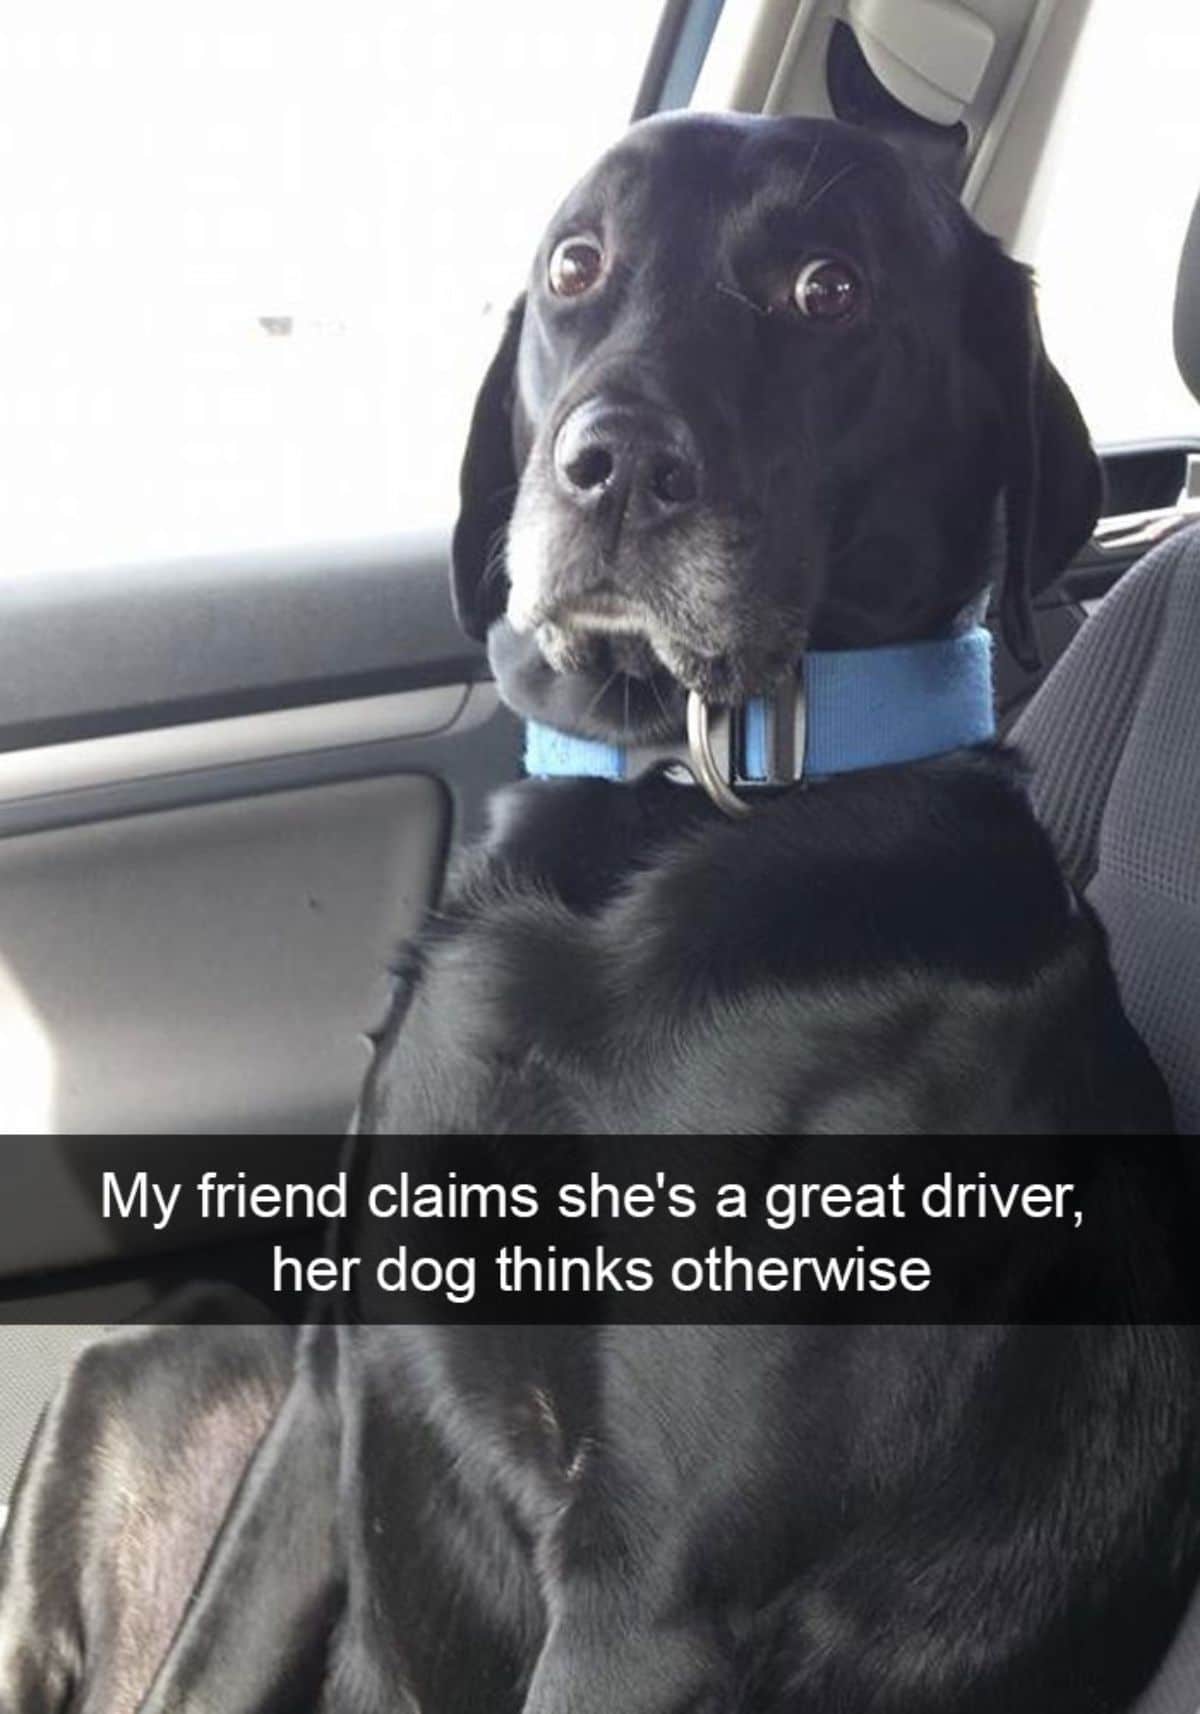 black dog with wide eyes sitting in the passenger seat of a car with a caption saying my friend claims she's a great driver, her dog thinks otherwise